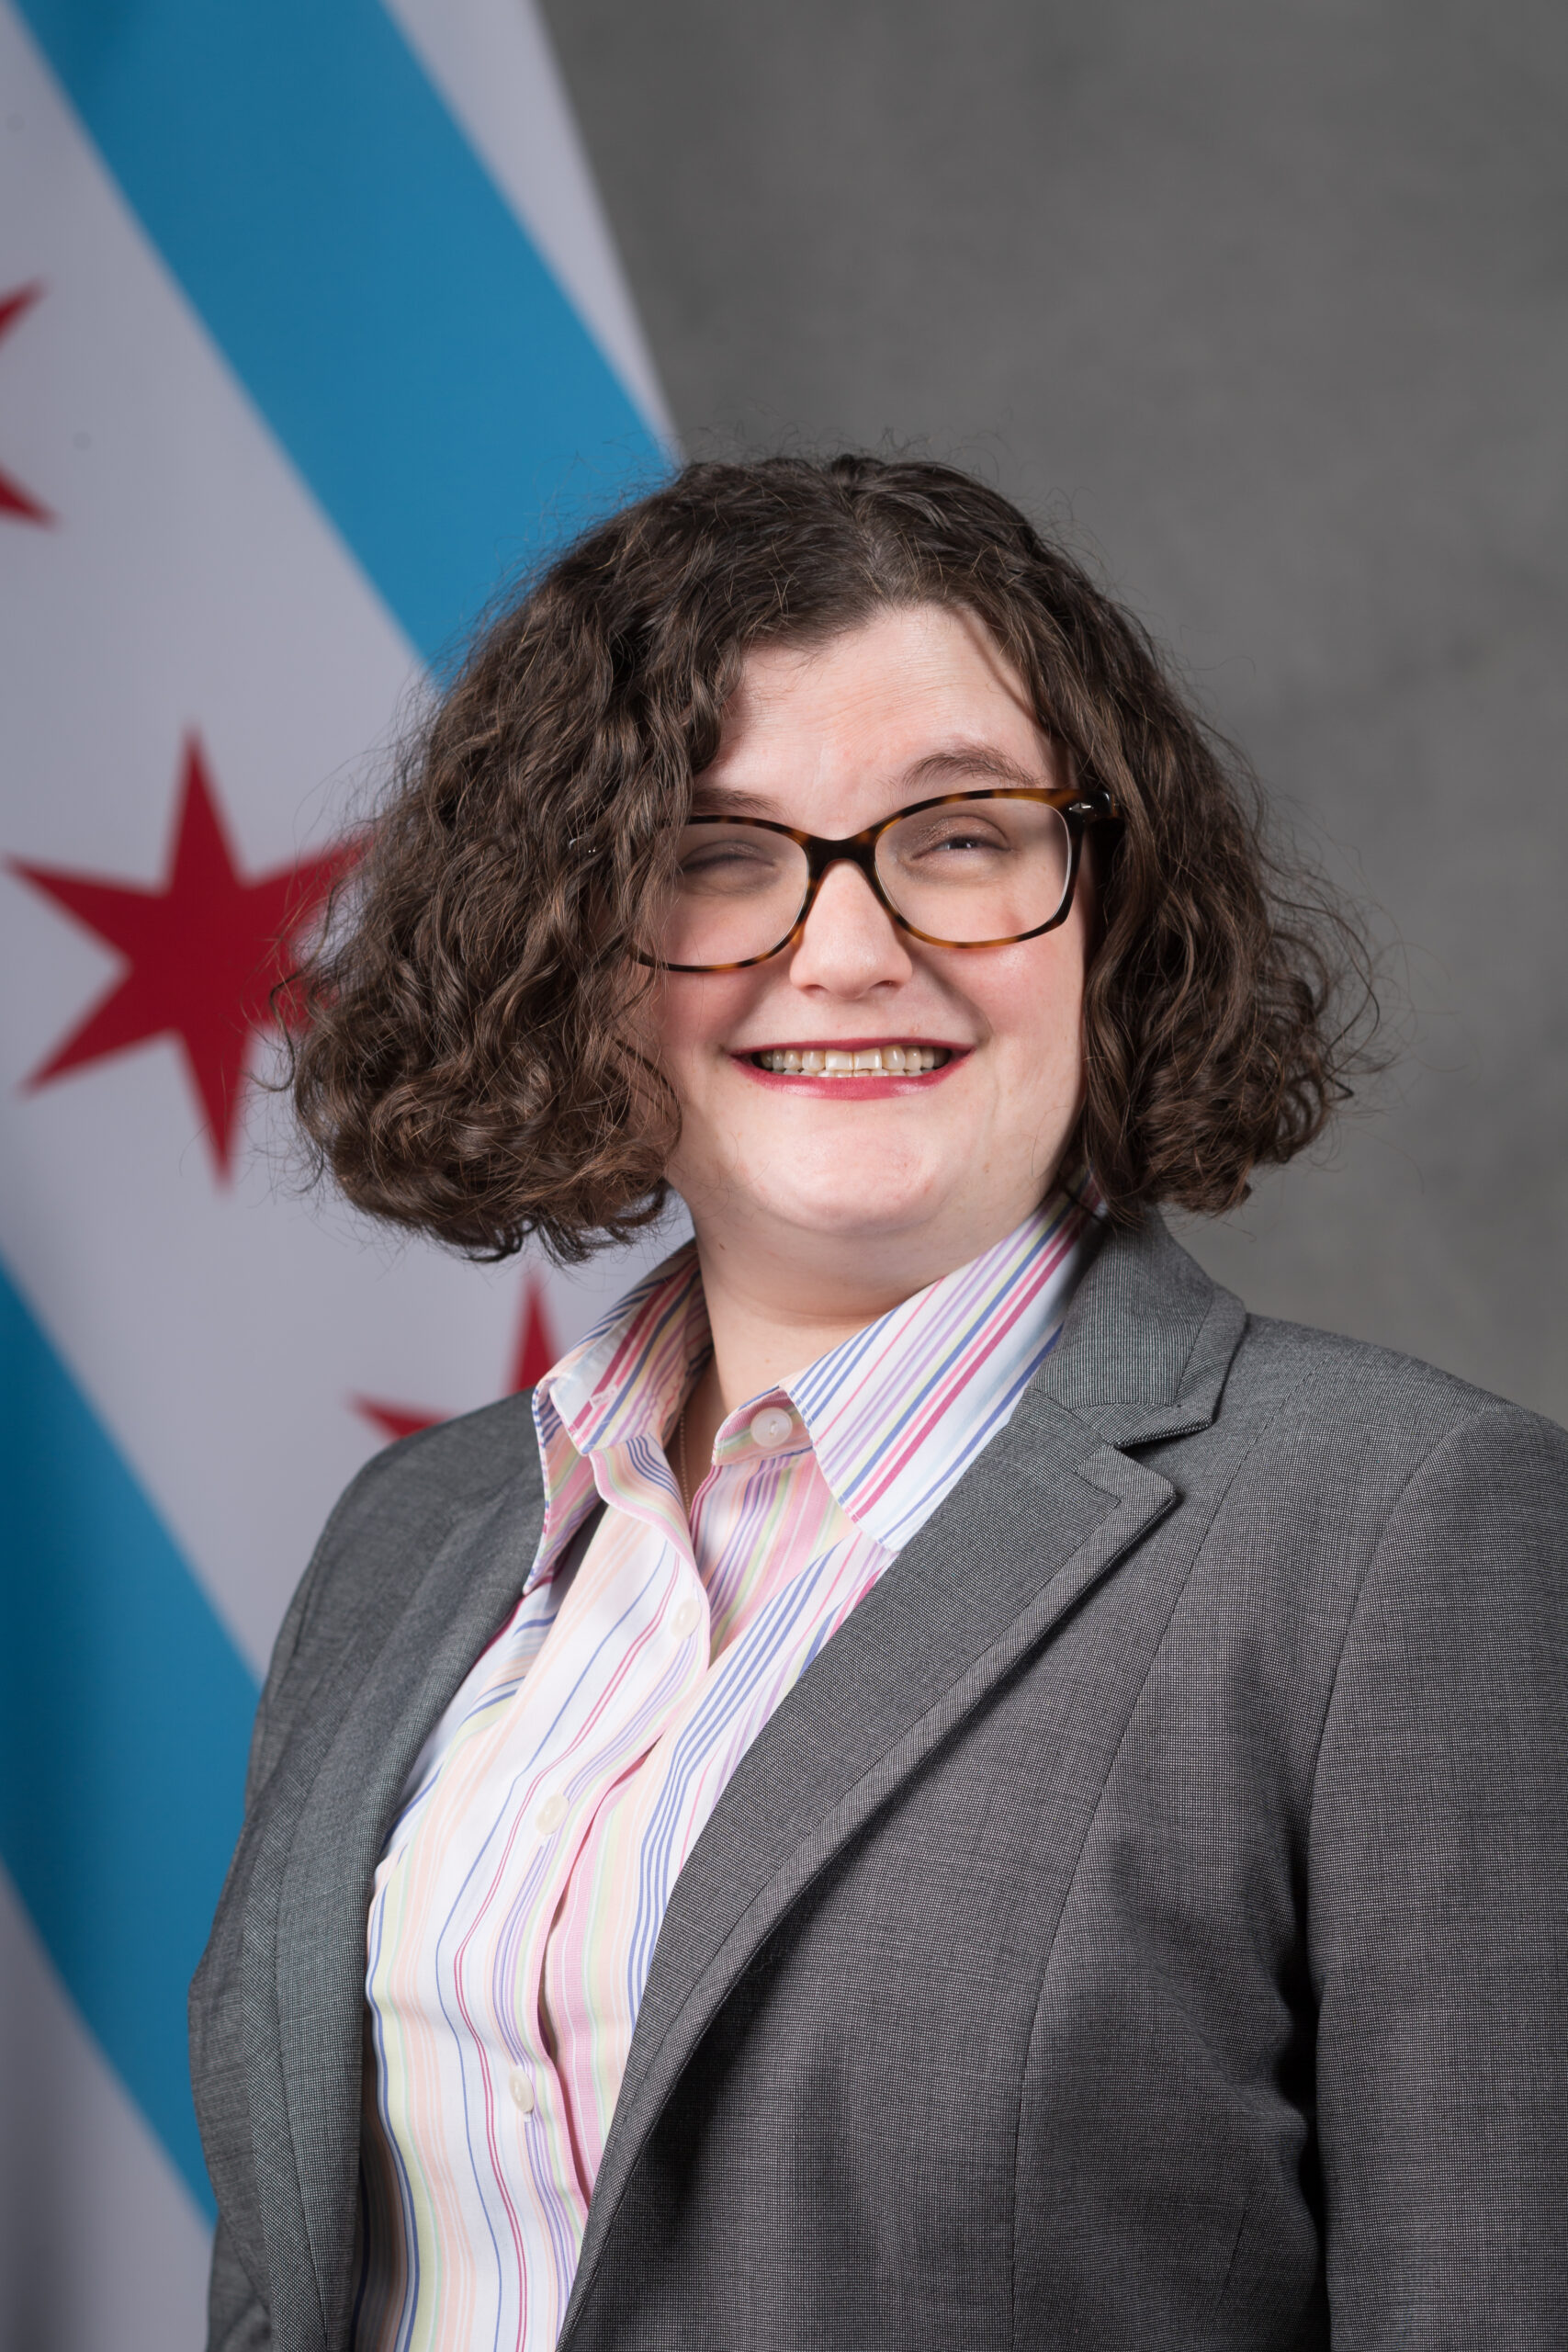 Carly is a Caucasian woman with short brown hair, wearing glasses, a collared shirt, and a gray jacket. She stands in front of a gray background with the city of Chicago flag in the background.